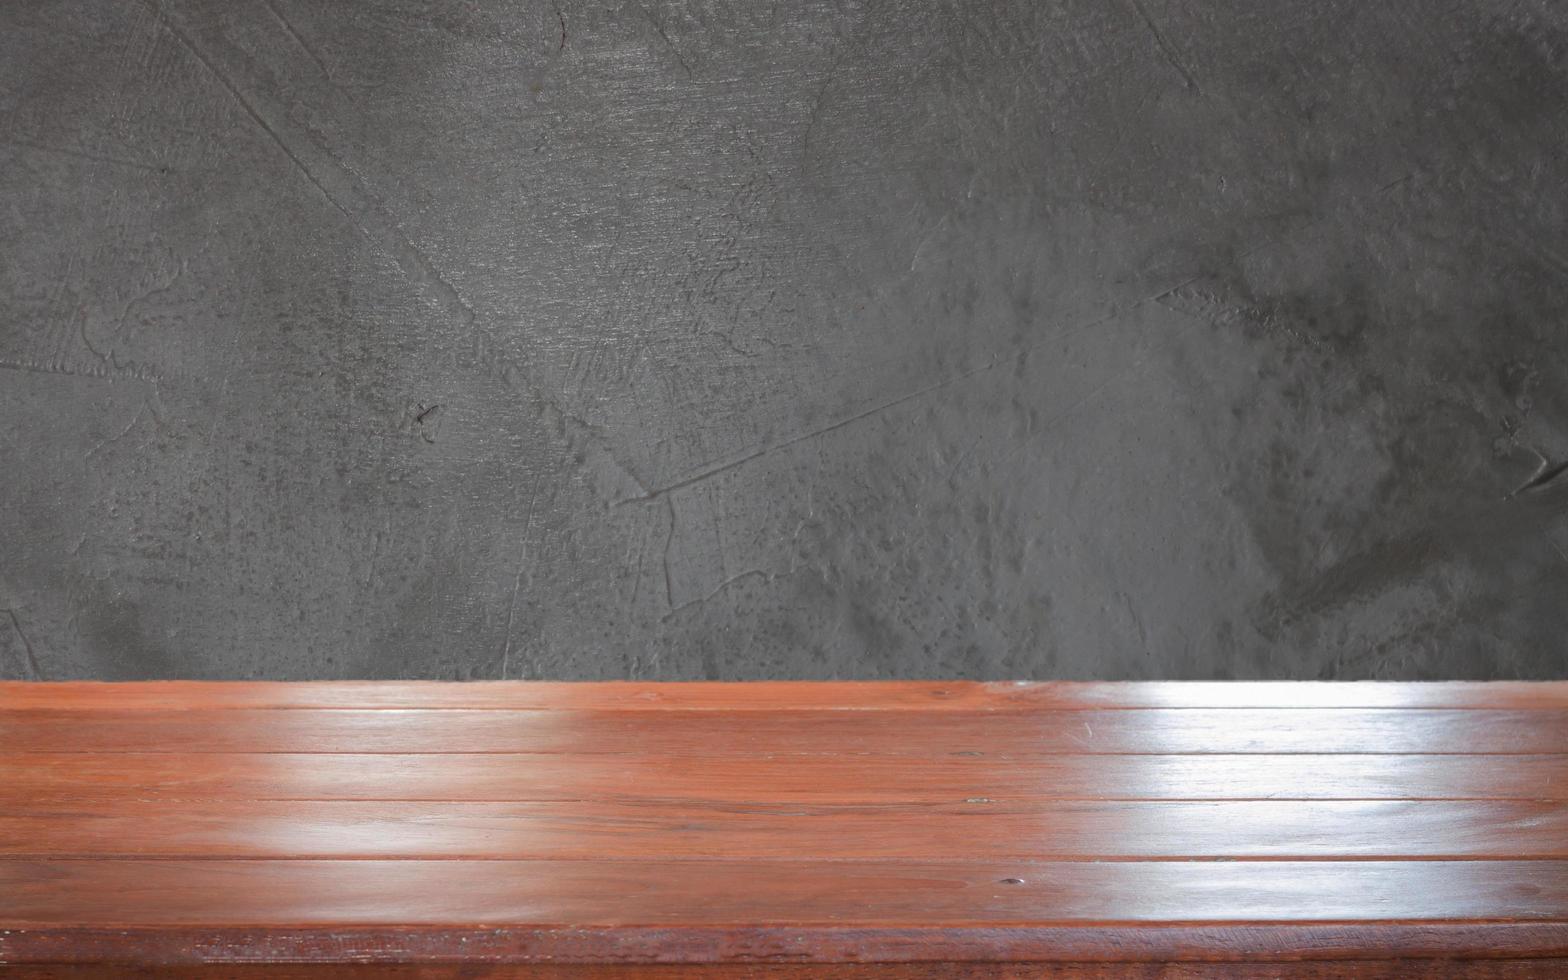 Wooden table against a dark grey background photo